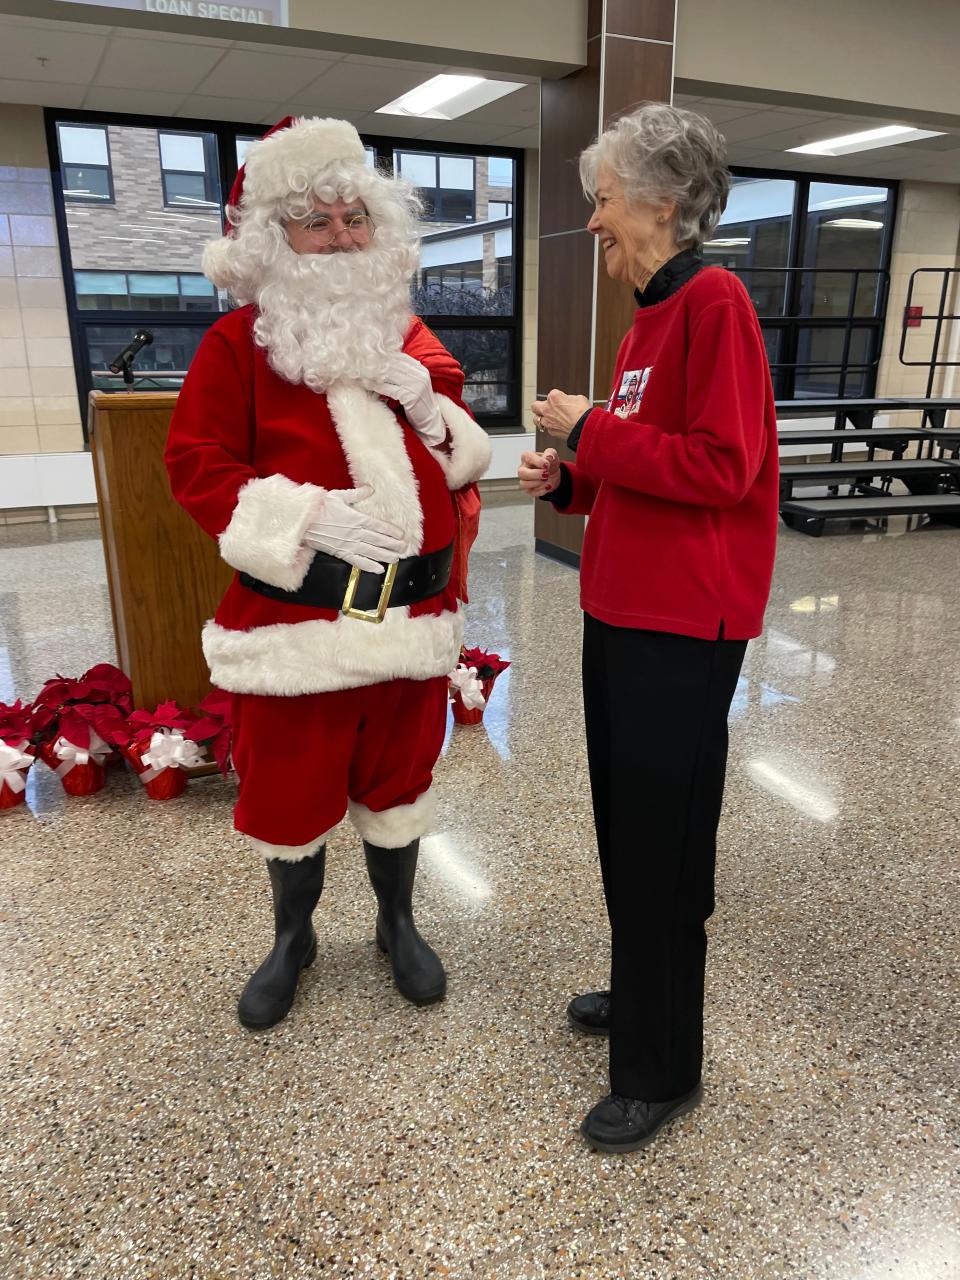 Santa (National Honor Society member Noah Zimmerman) greets Marty Brown at the Port Clinton High School’s Holiday Breakfast with the Arts. Local residents enjoyed breakfast and a morning concert which has become a holiday tradition at Port Clinton High School.